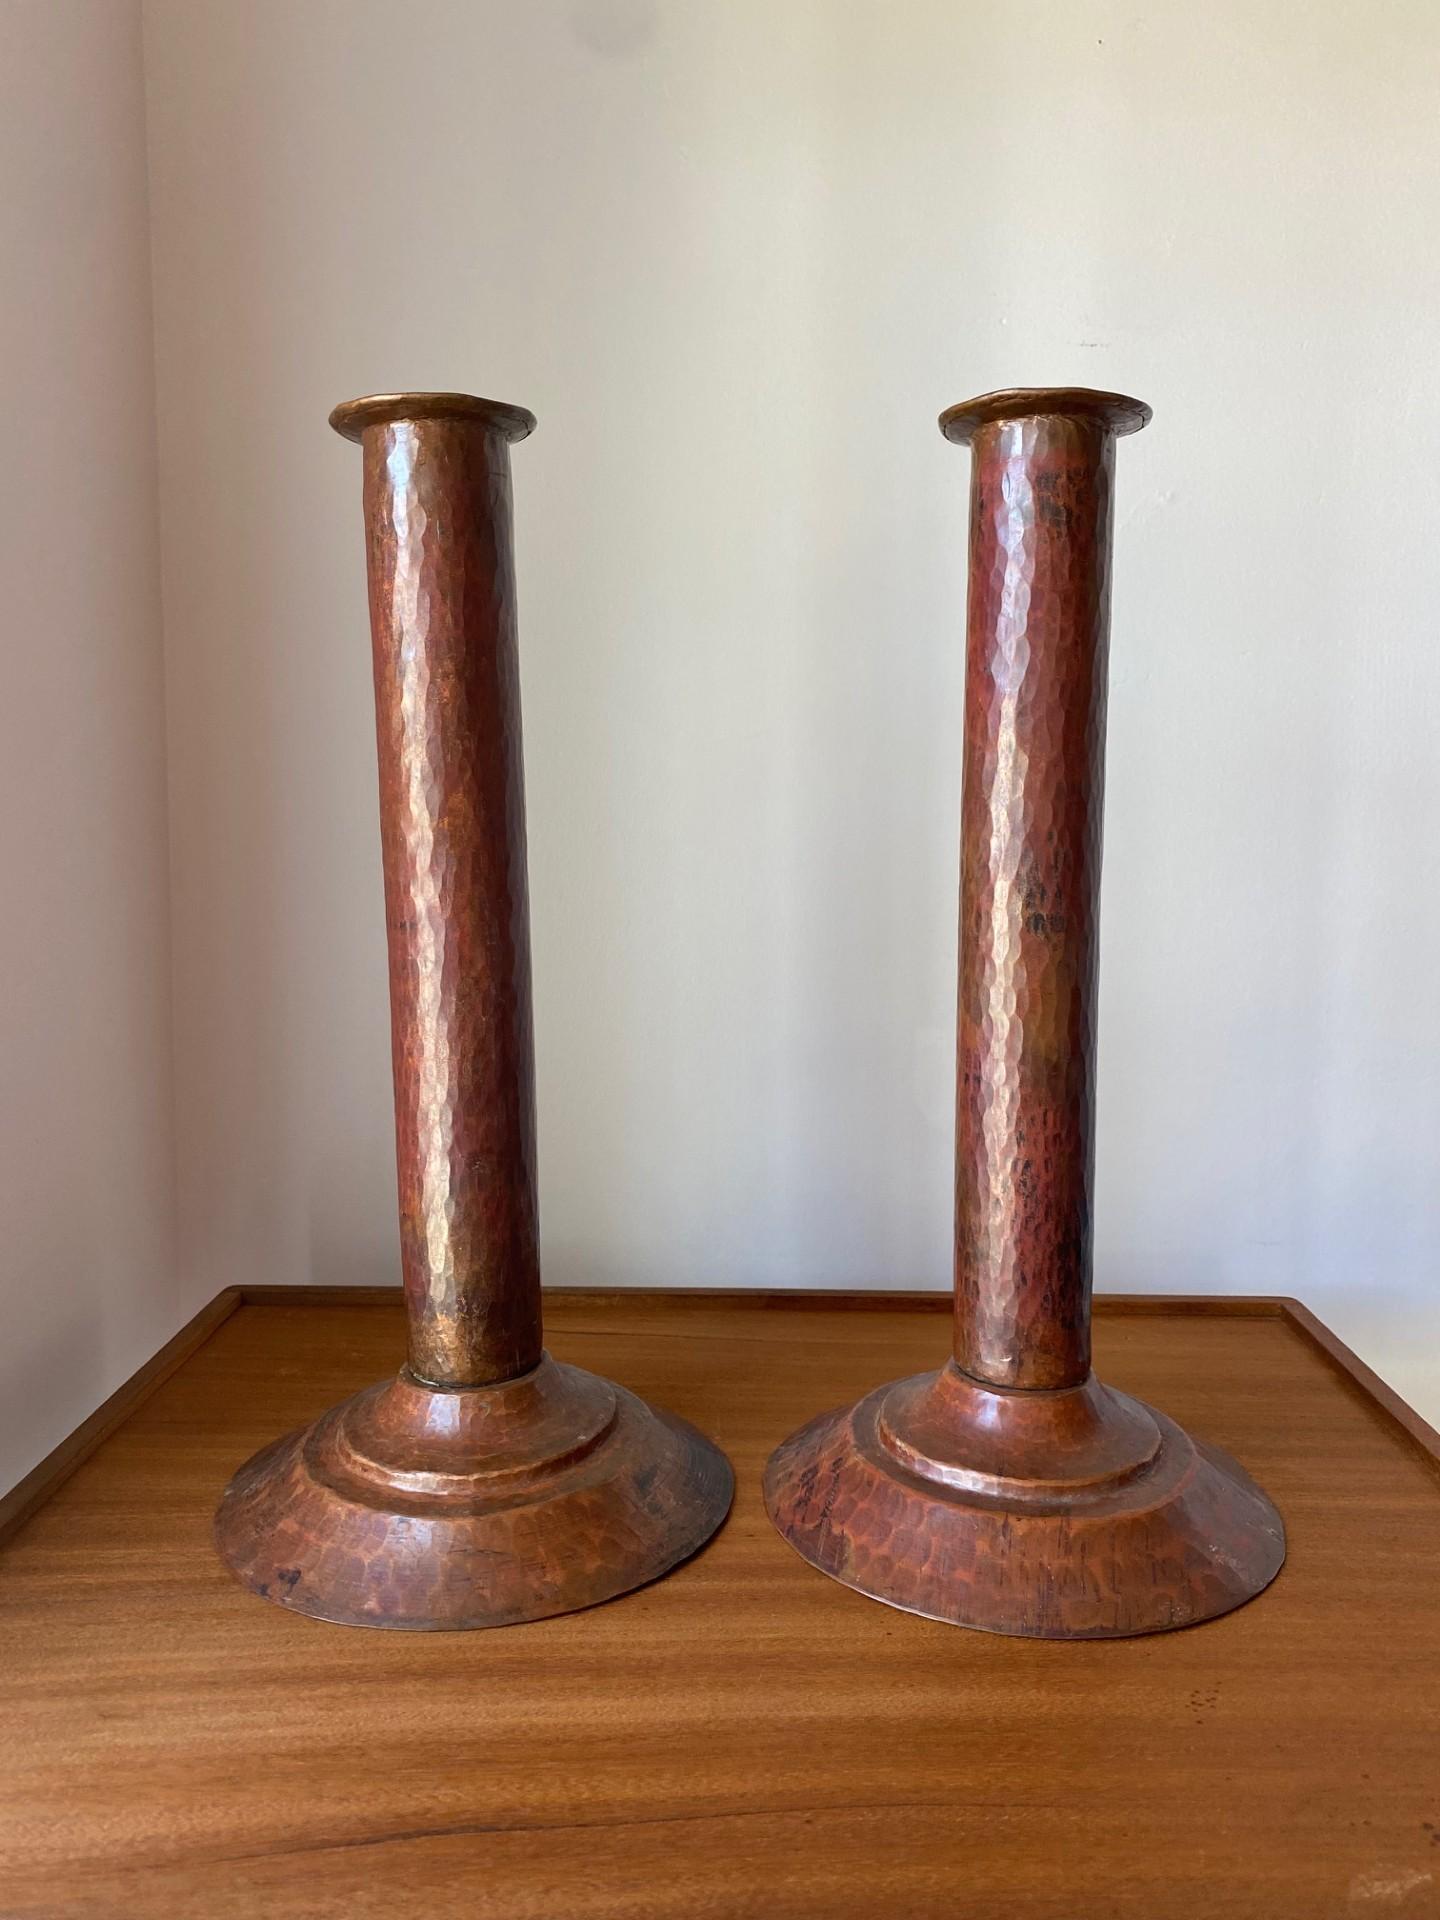 Beautiful and sculptural pair of hammered copper candleholders.  This pair is fully realized in quality copper that enhances the beauty and form of each candleholder.  The simple lines concocted in each one are minimal yet exquisite in the subtle